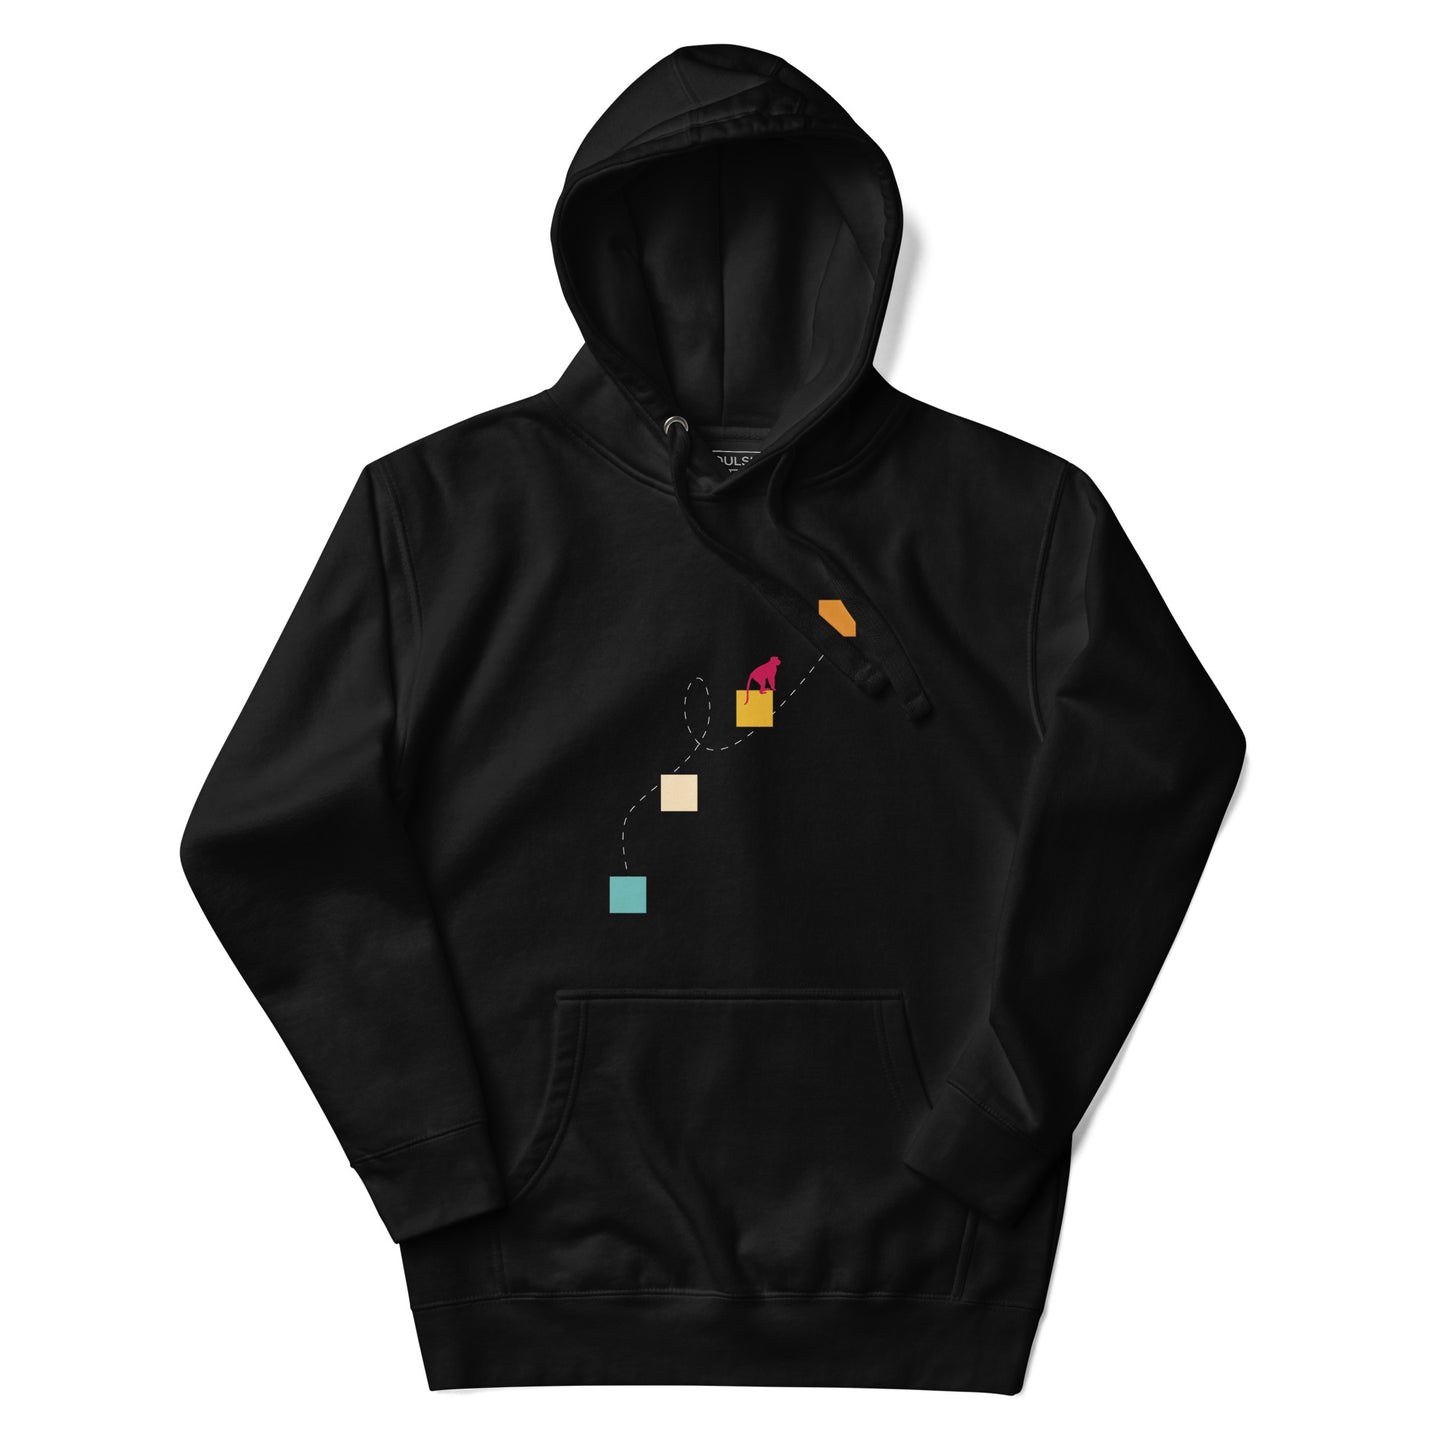 NEVER GIVE UP Hoodie